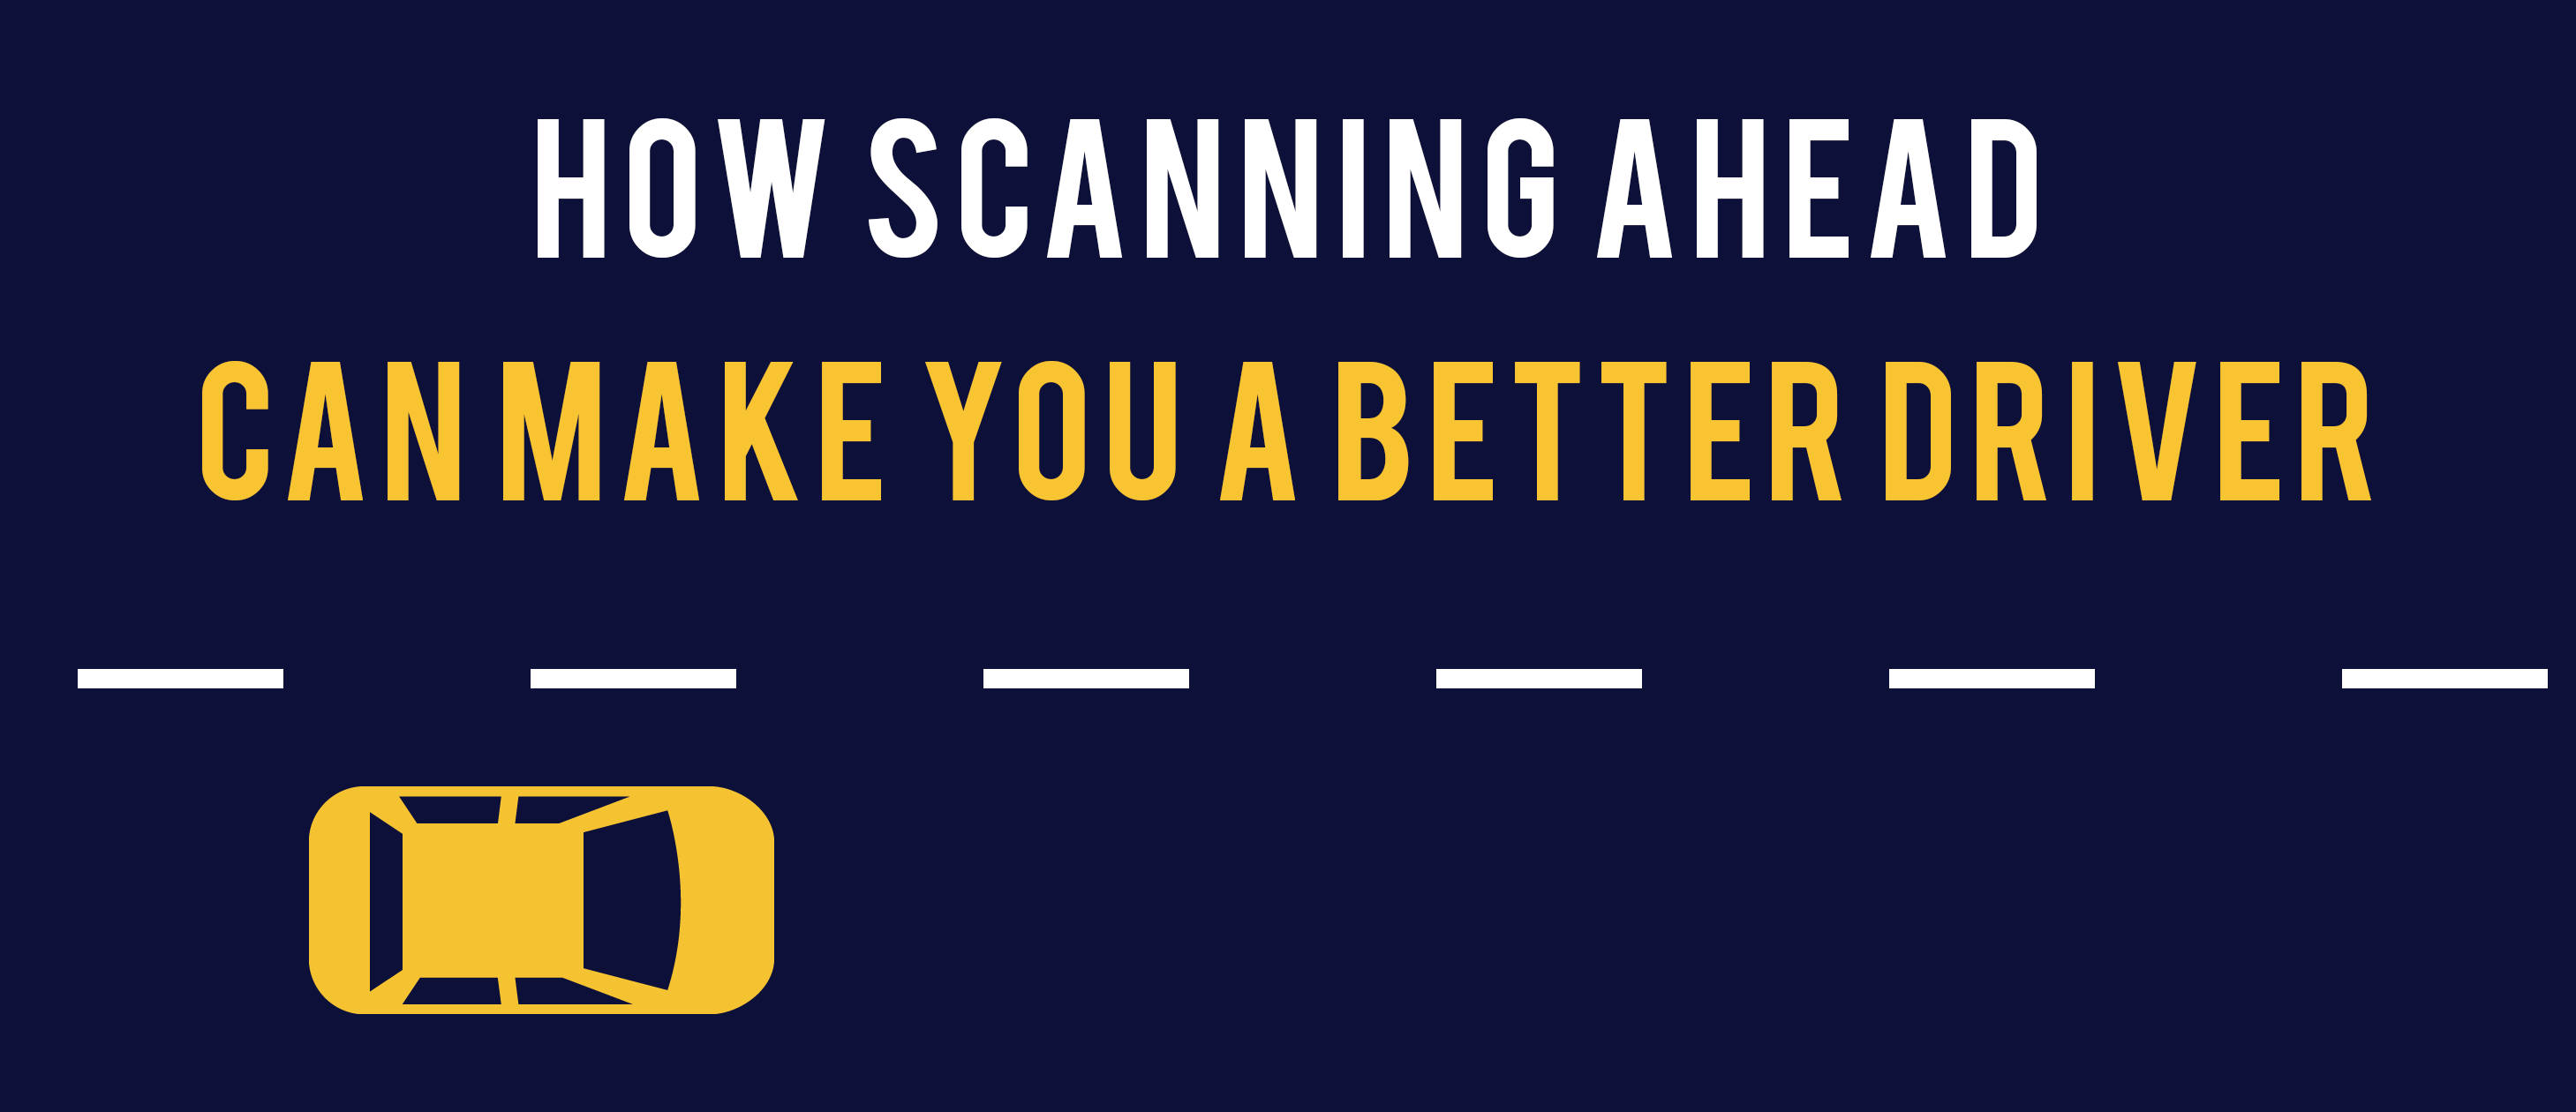 How scanning ahead can make you a better driver